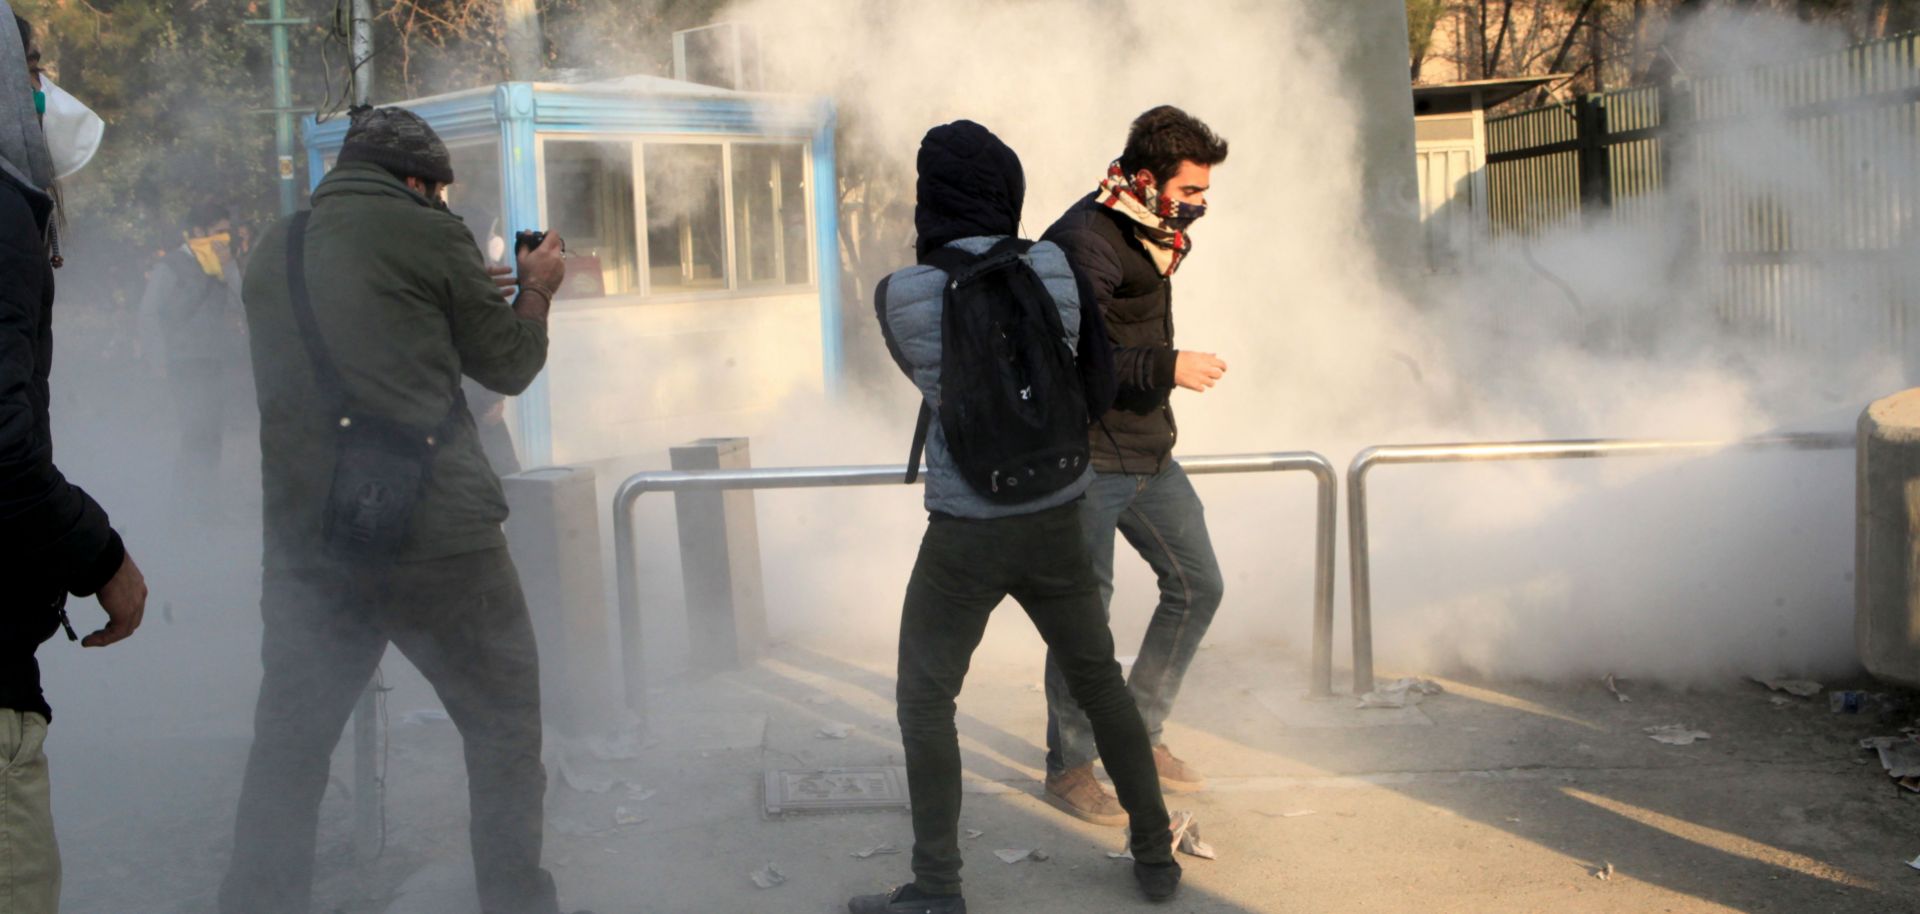 The economic protests targeting Iran's leaders have died down, but their political ramifications could determine which direction the Islamic republic will go.